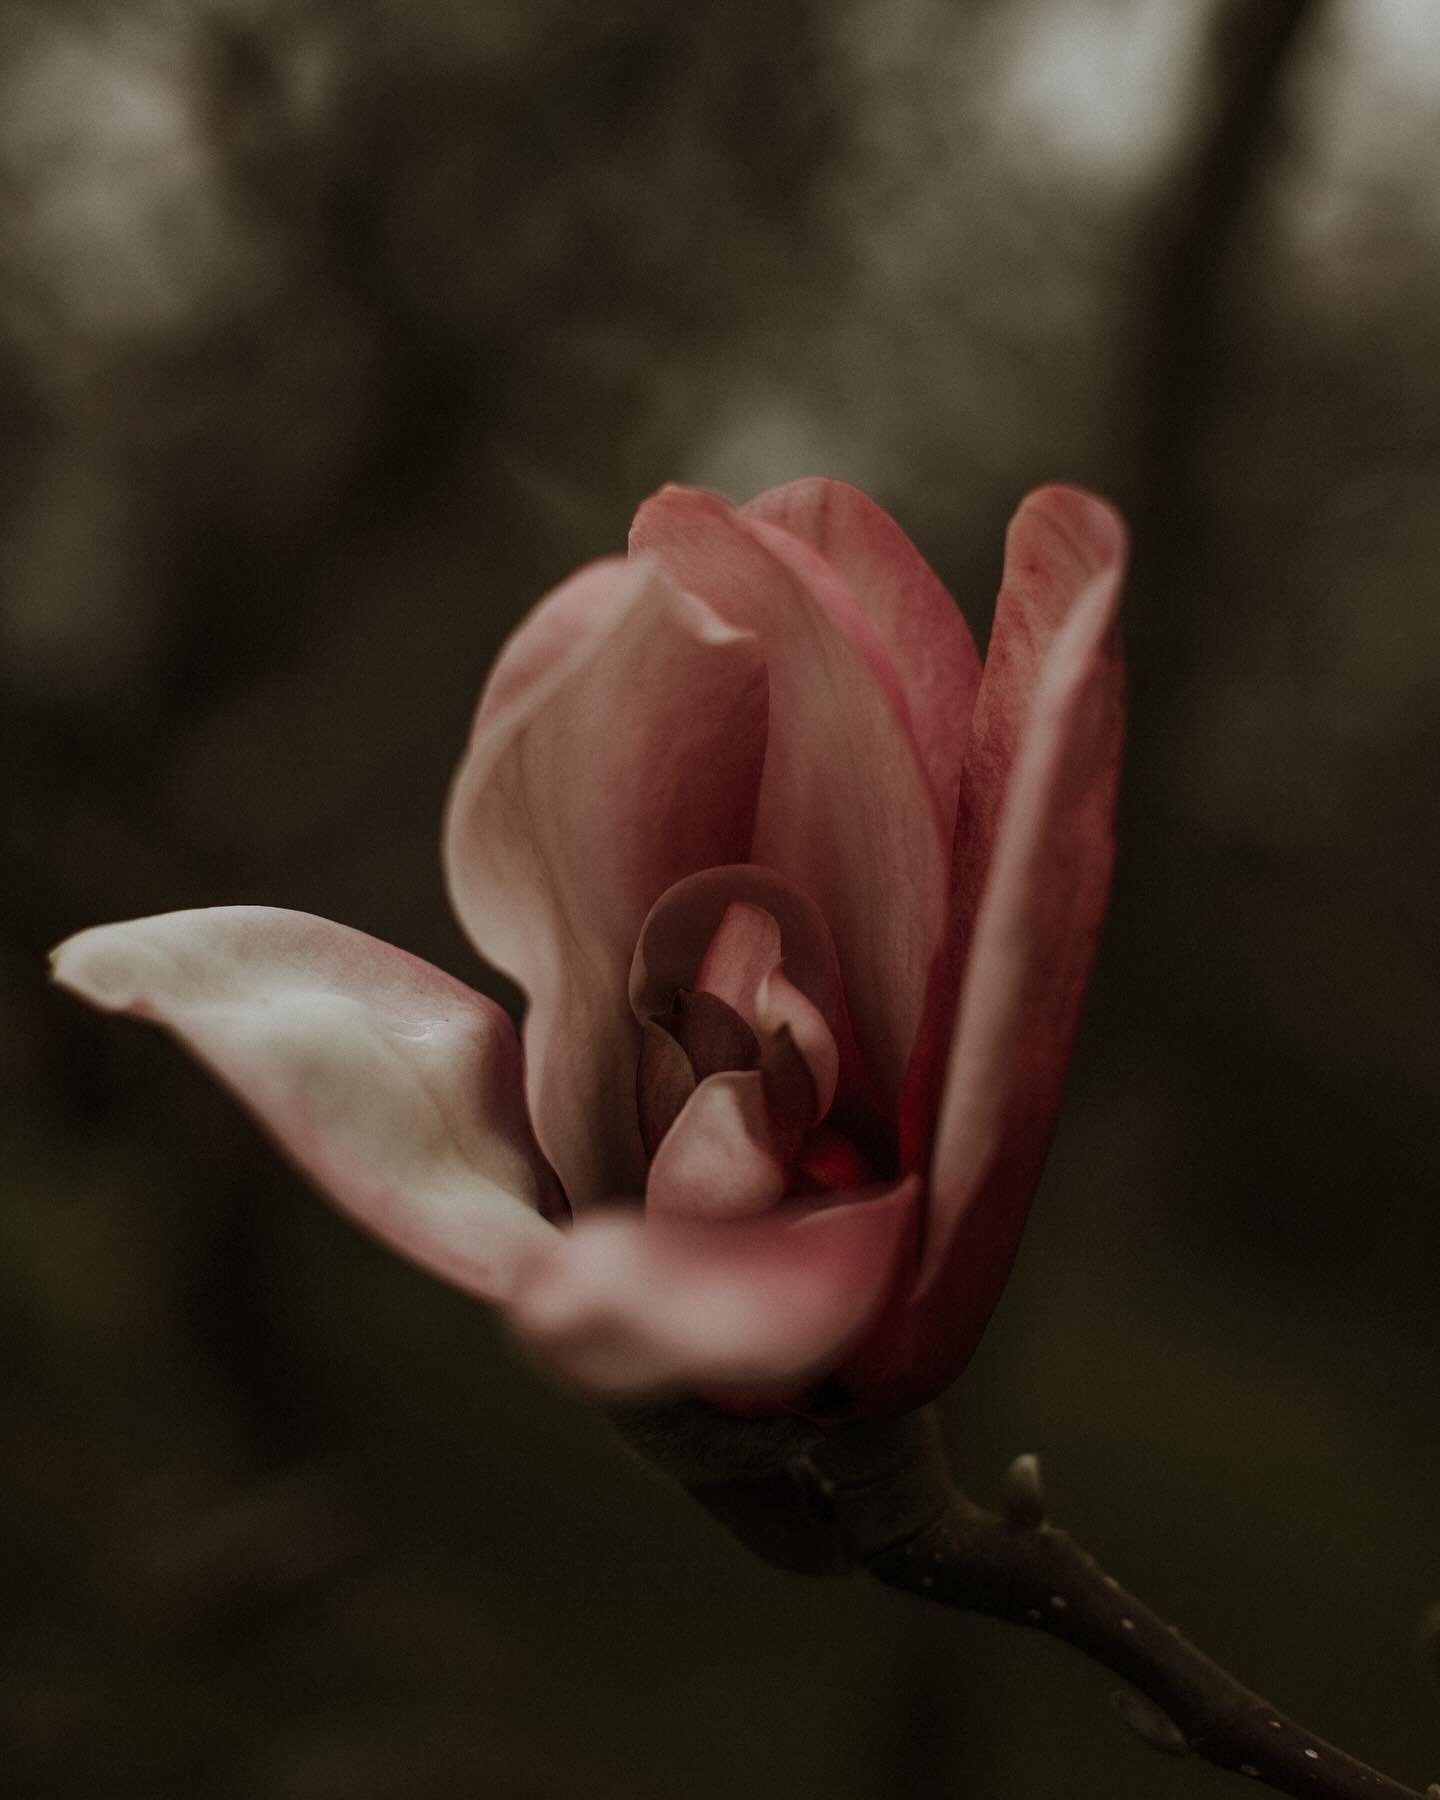 Magnolia. Herald the arrival of warmer weather. The young petals (when the flowers are buds or just opening out) are edible. The chemicals in the flower may help to prevent cavities and reduce gum swelling, have anxiety reducing effects, and in Tradi